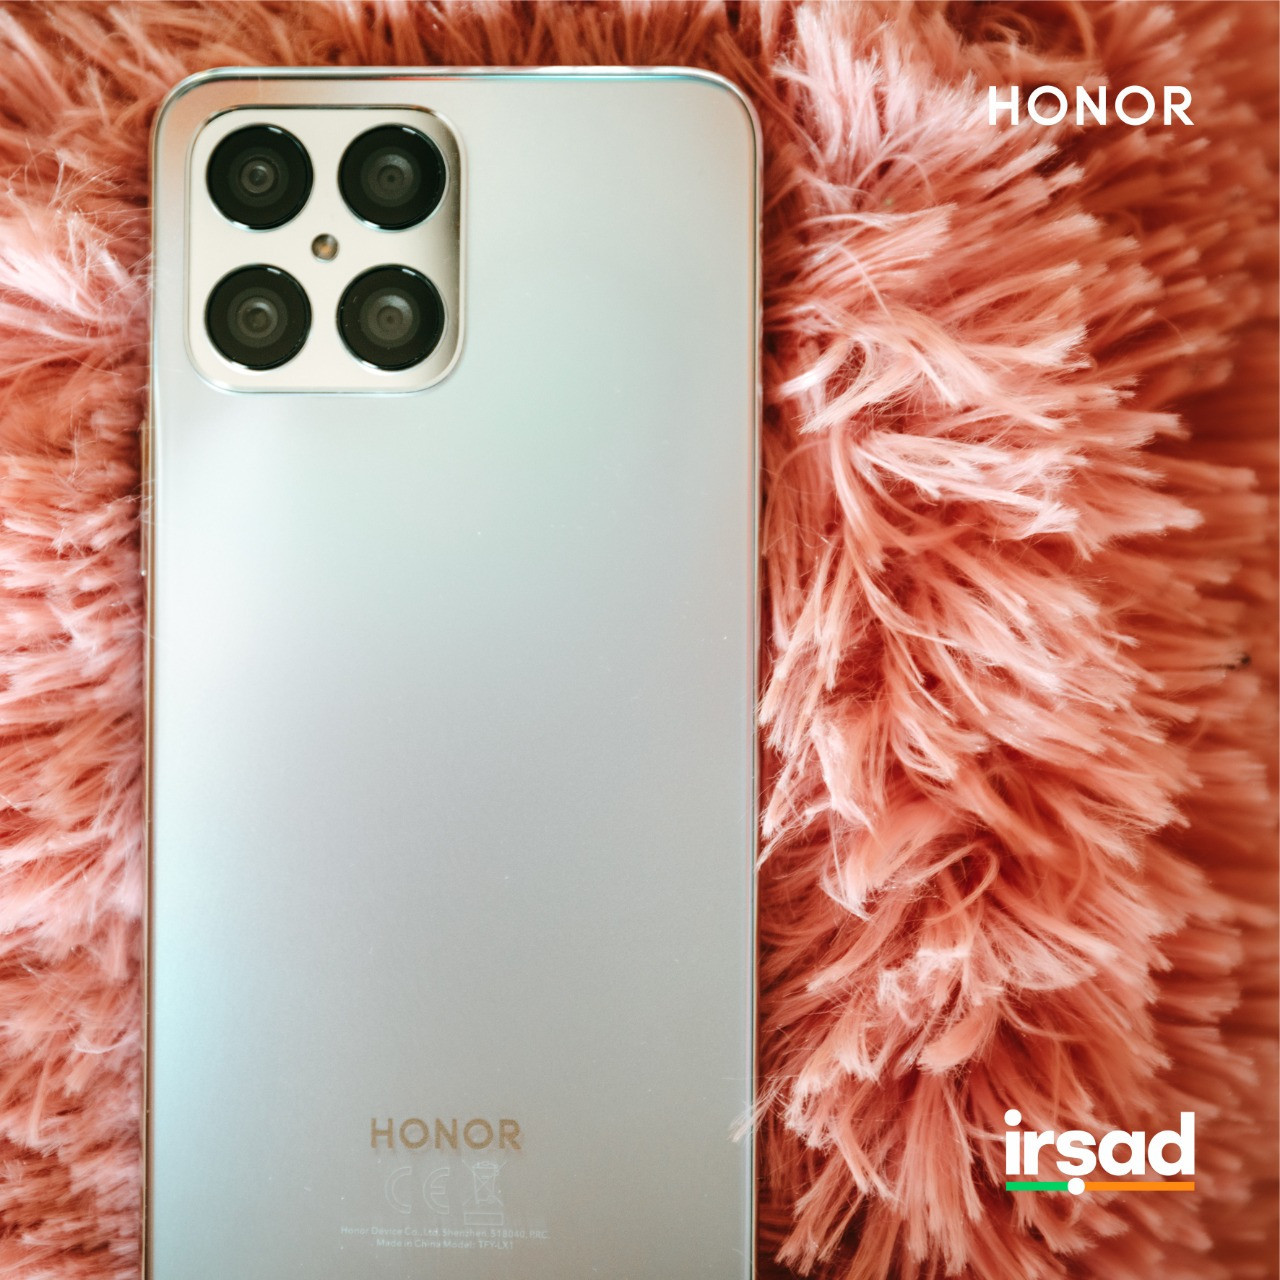 HONOR has introduced a new series of HONOR X smartphones Daily News